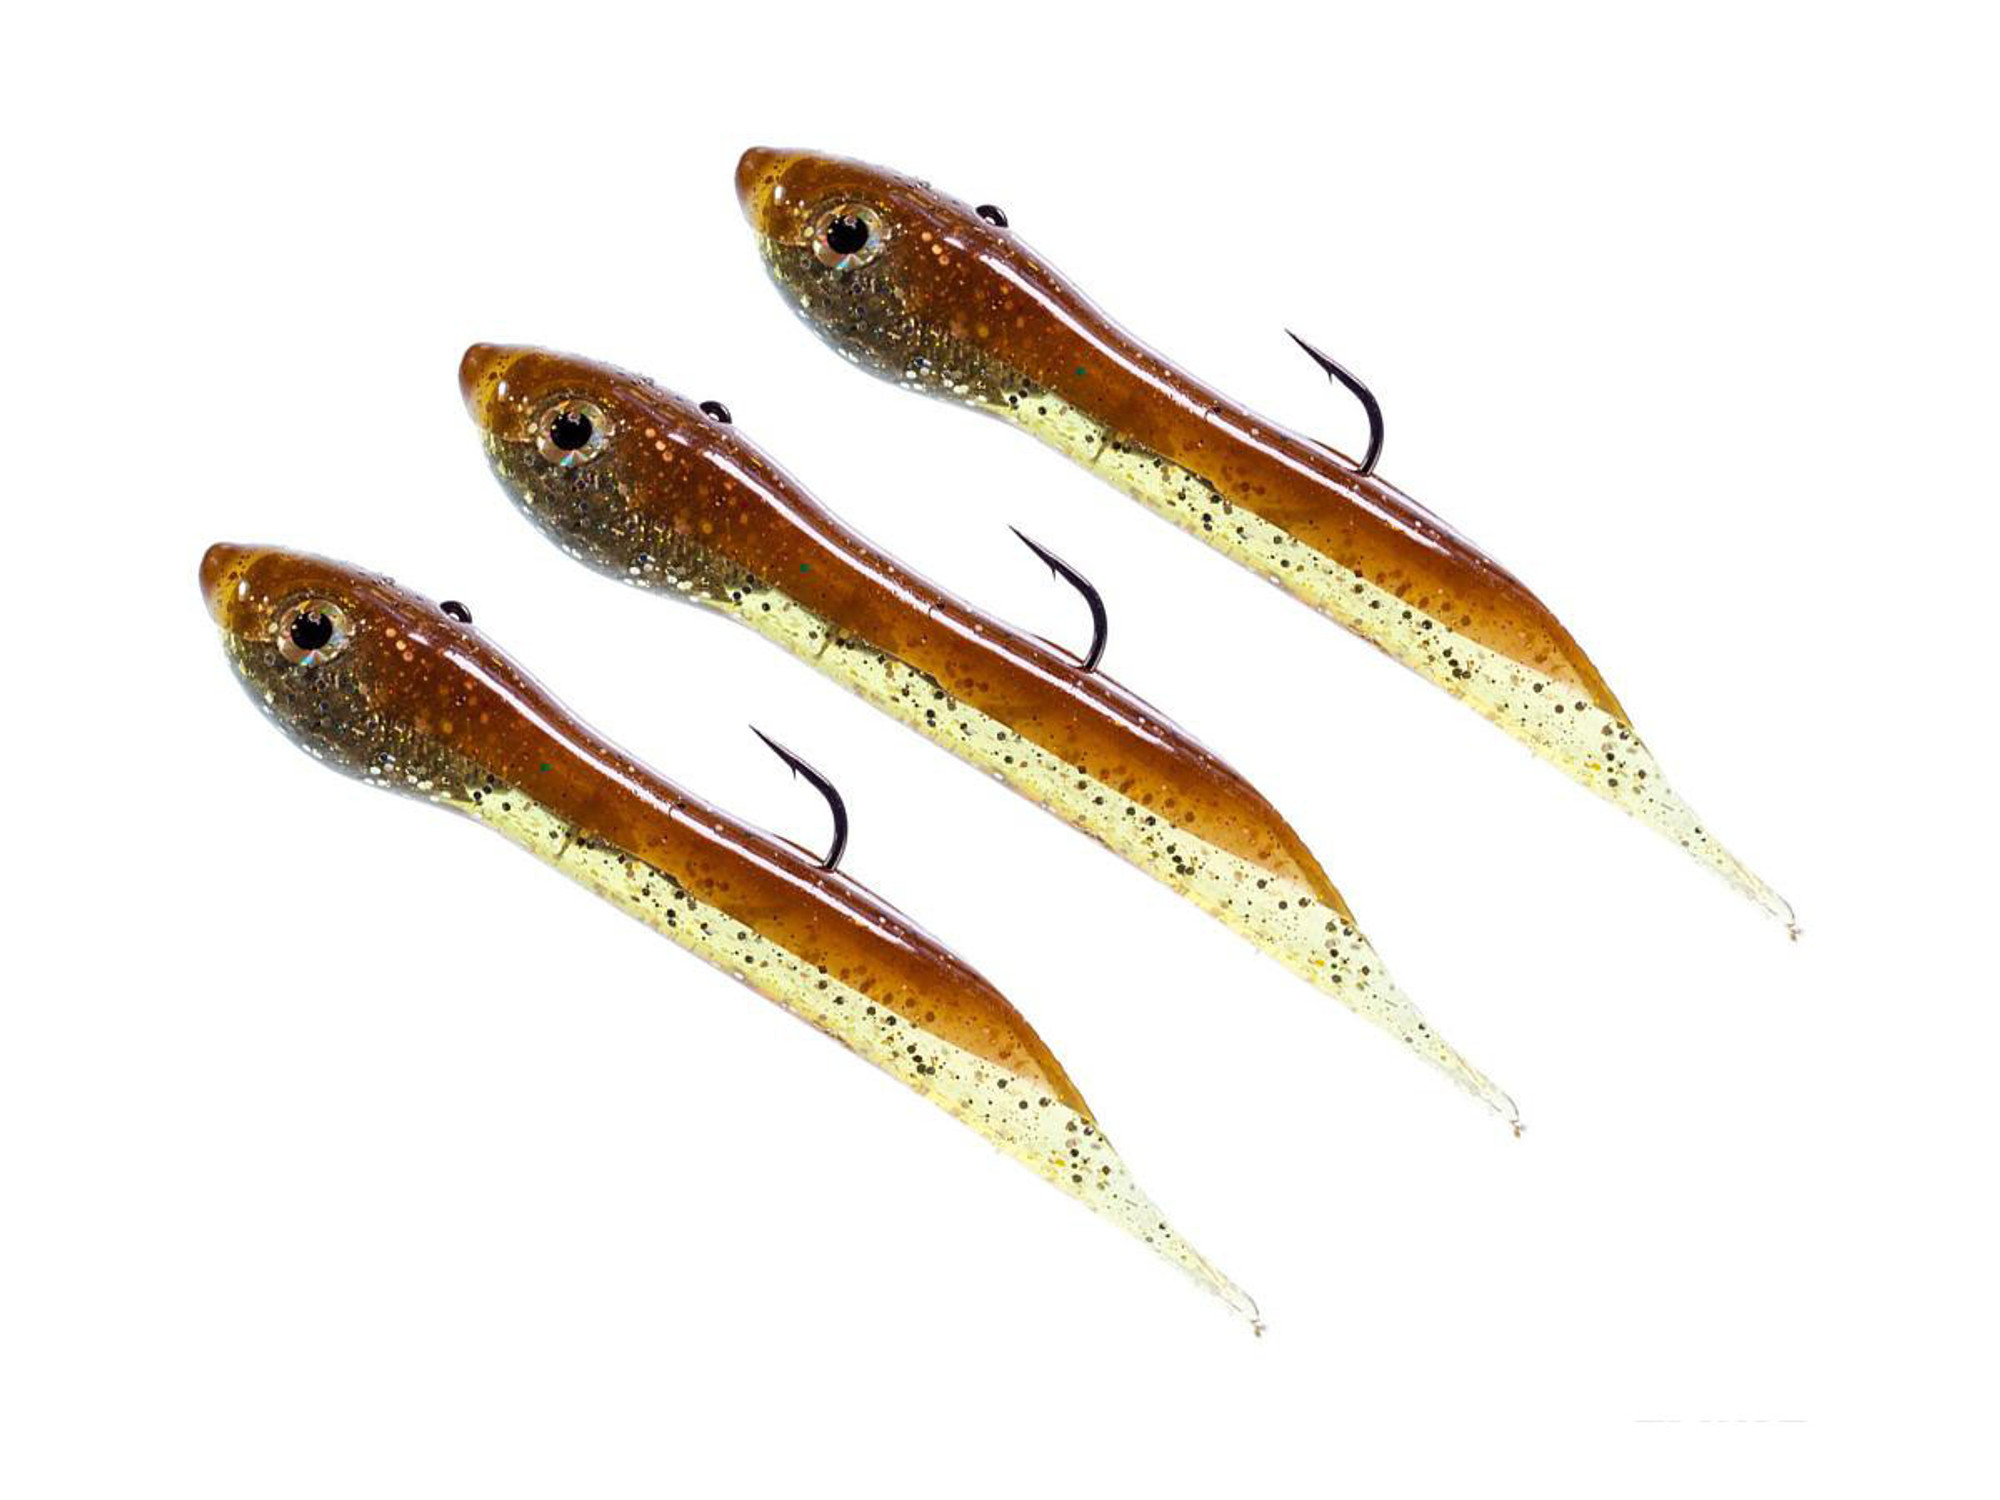 Hook Up Baits Handcrafted Soft Fishing Jigs - Brown Gold / 2" / 1/16 oz